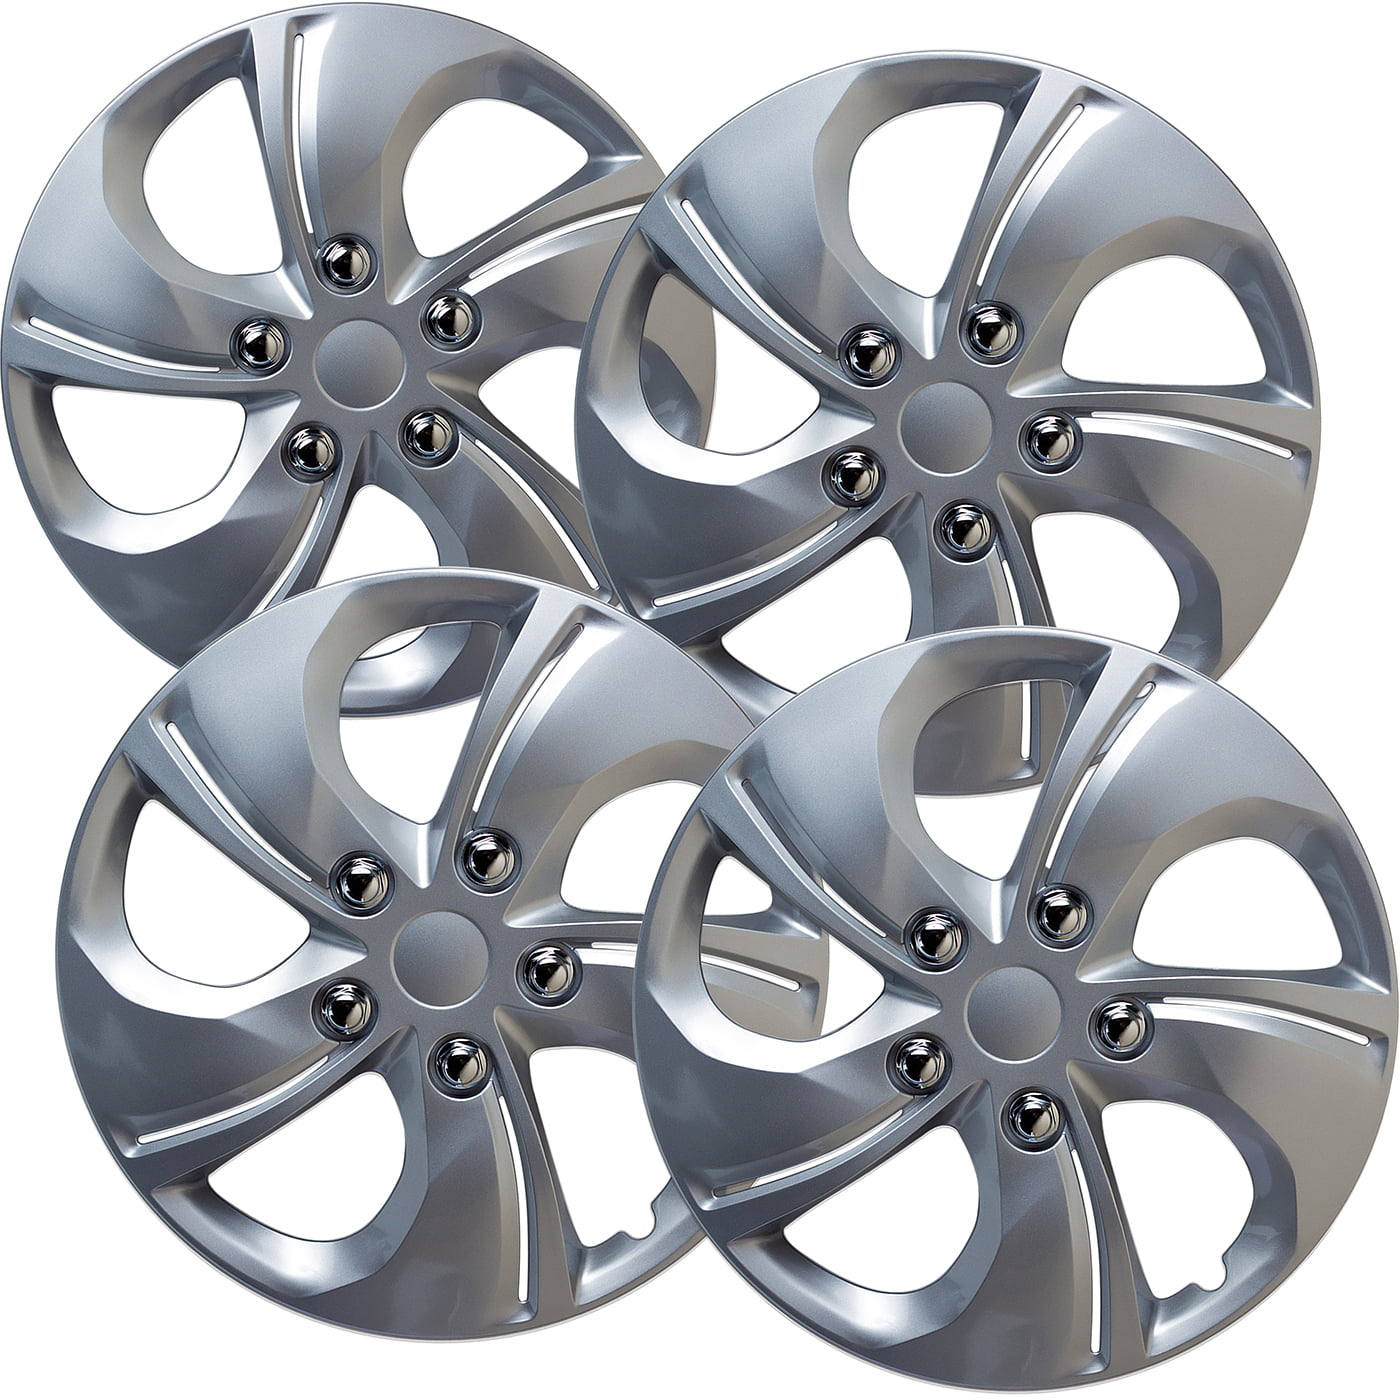 4 Piece Set 13" Inch Hub Cap Silver Rim Cover for OEM Steel Wheel Covers Caps 